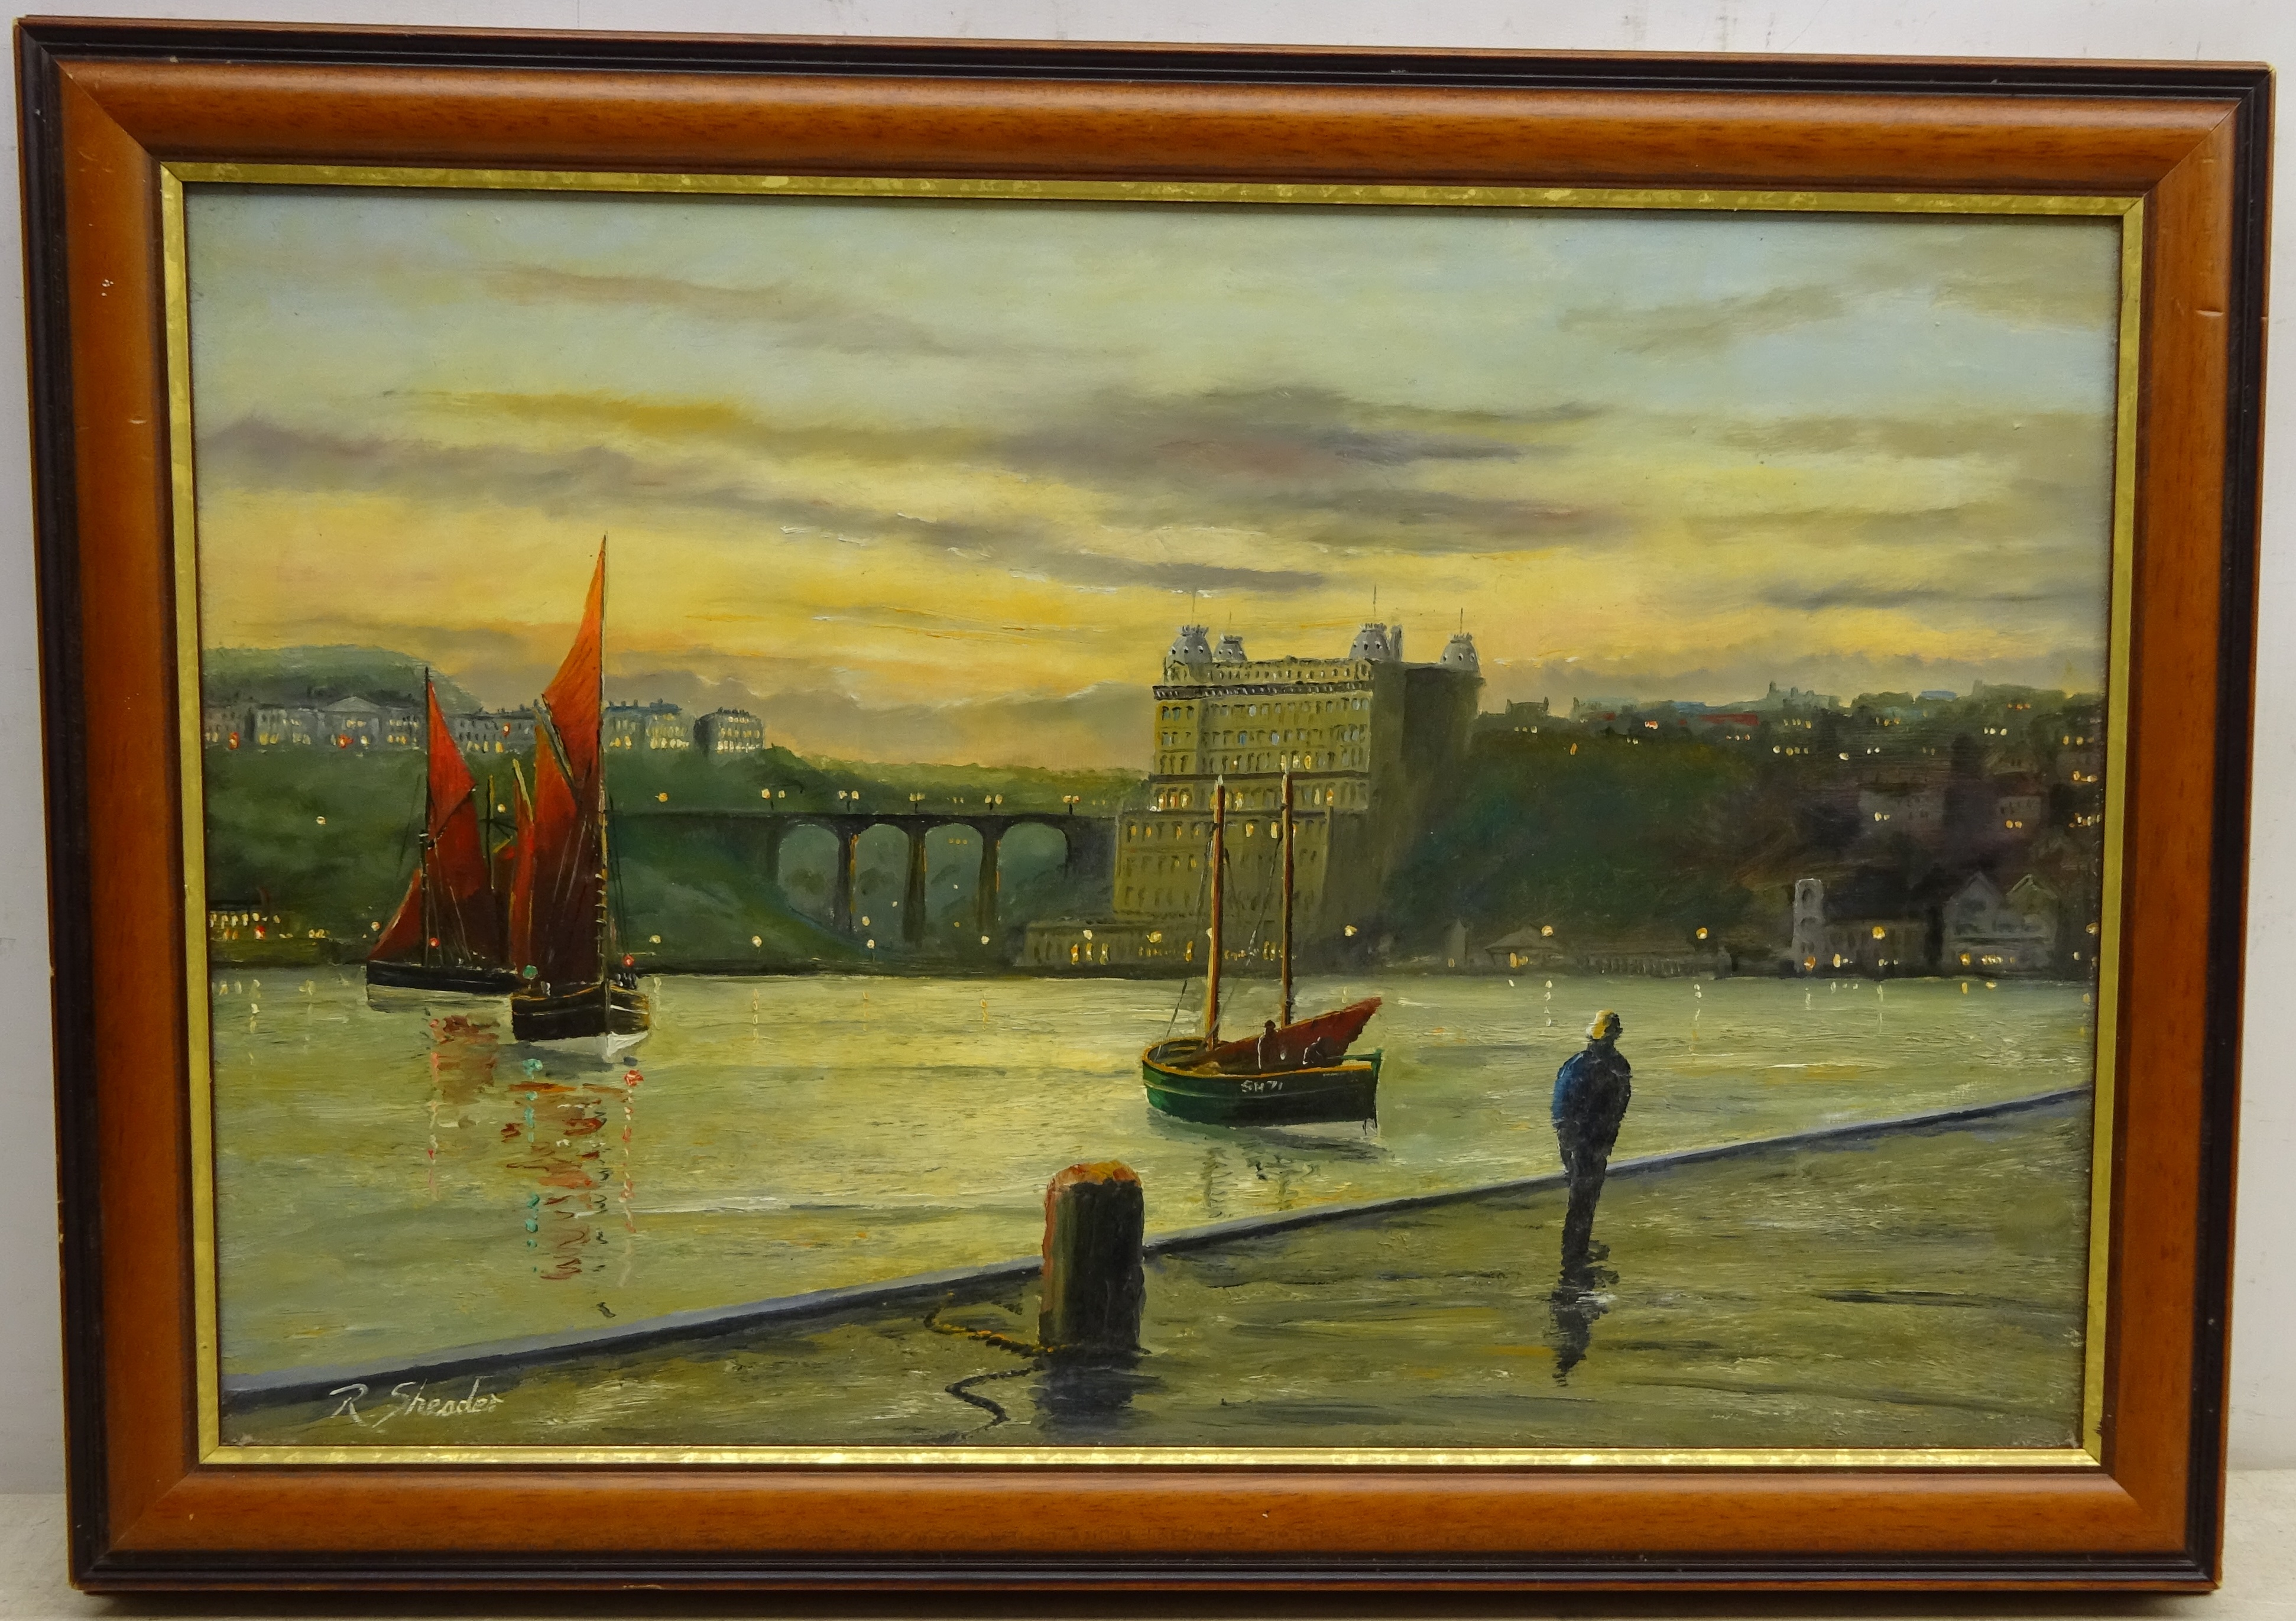 Robert Sheader (British 20th century): Grand Hotel and Spa Bridge from the West Pier Scarborough, - Image 2 of 2